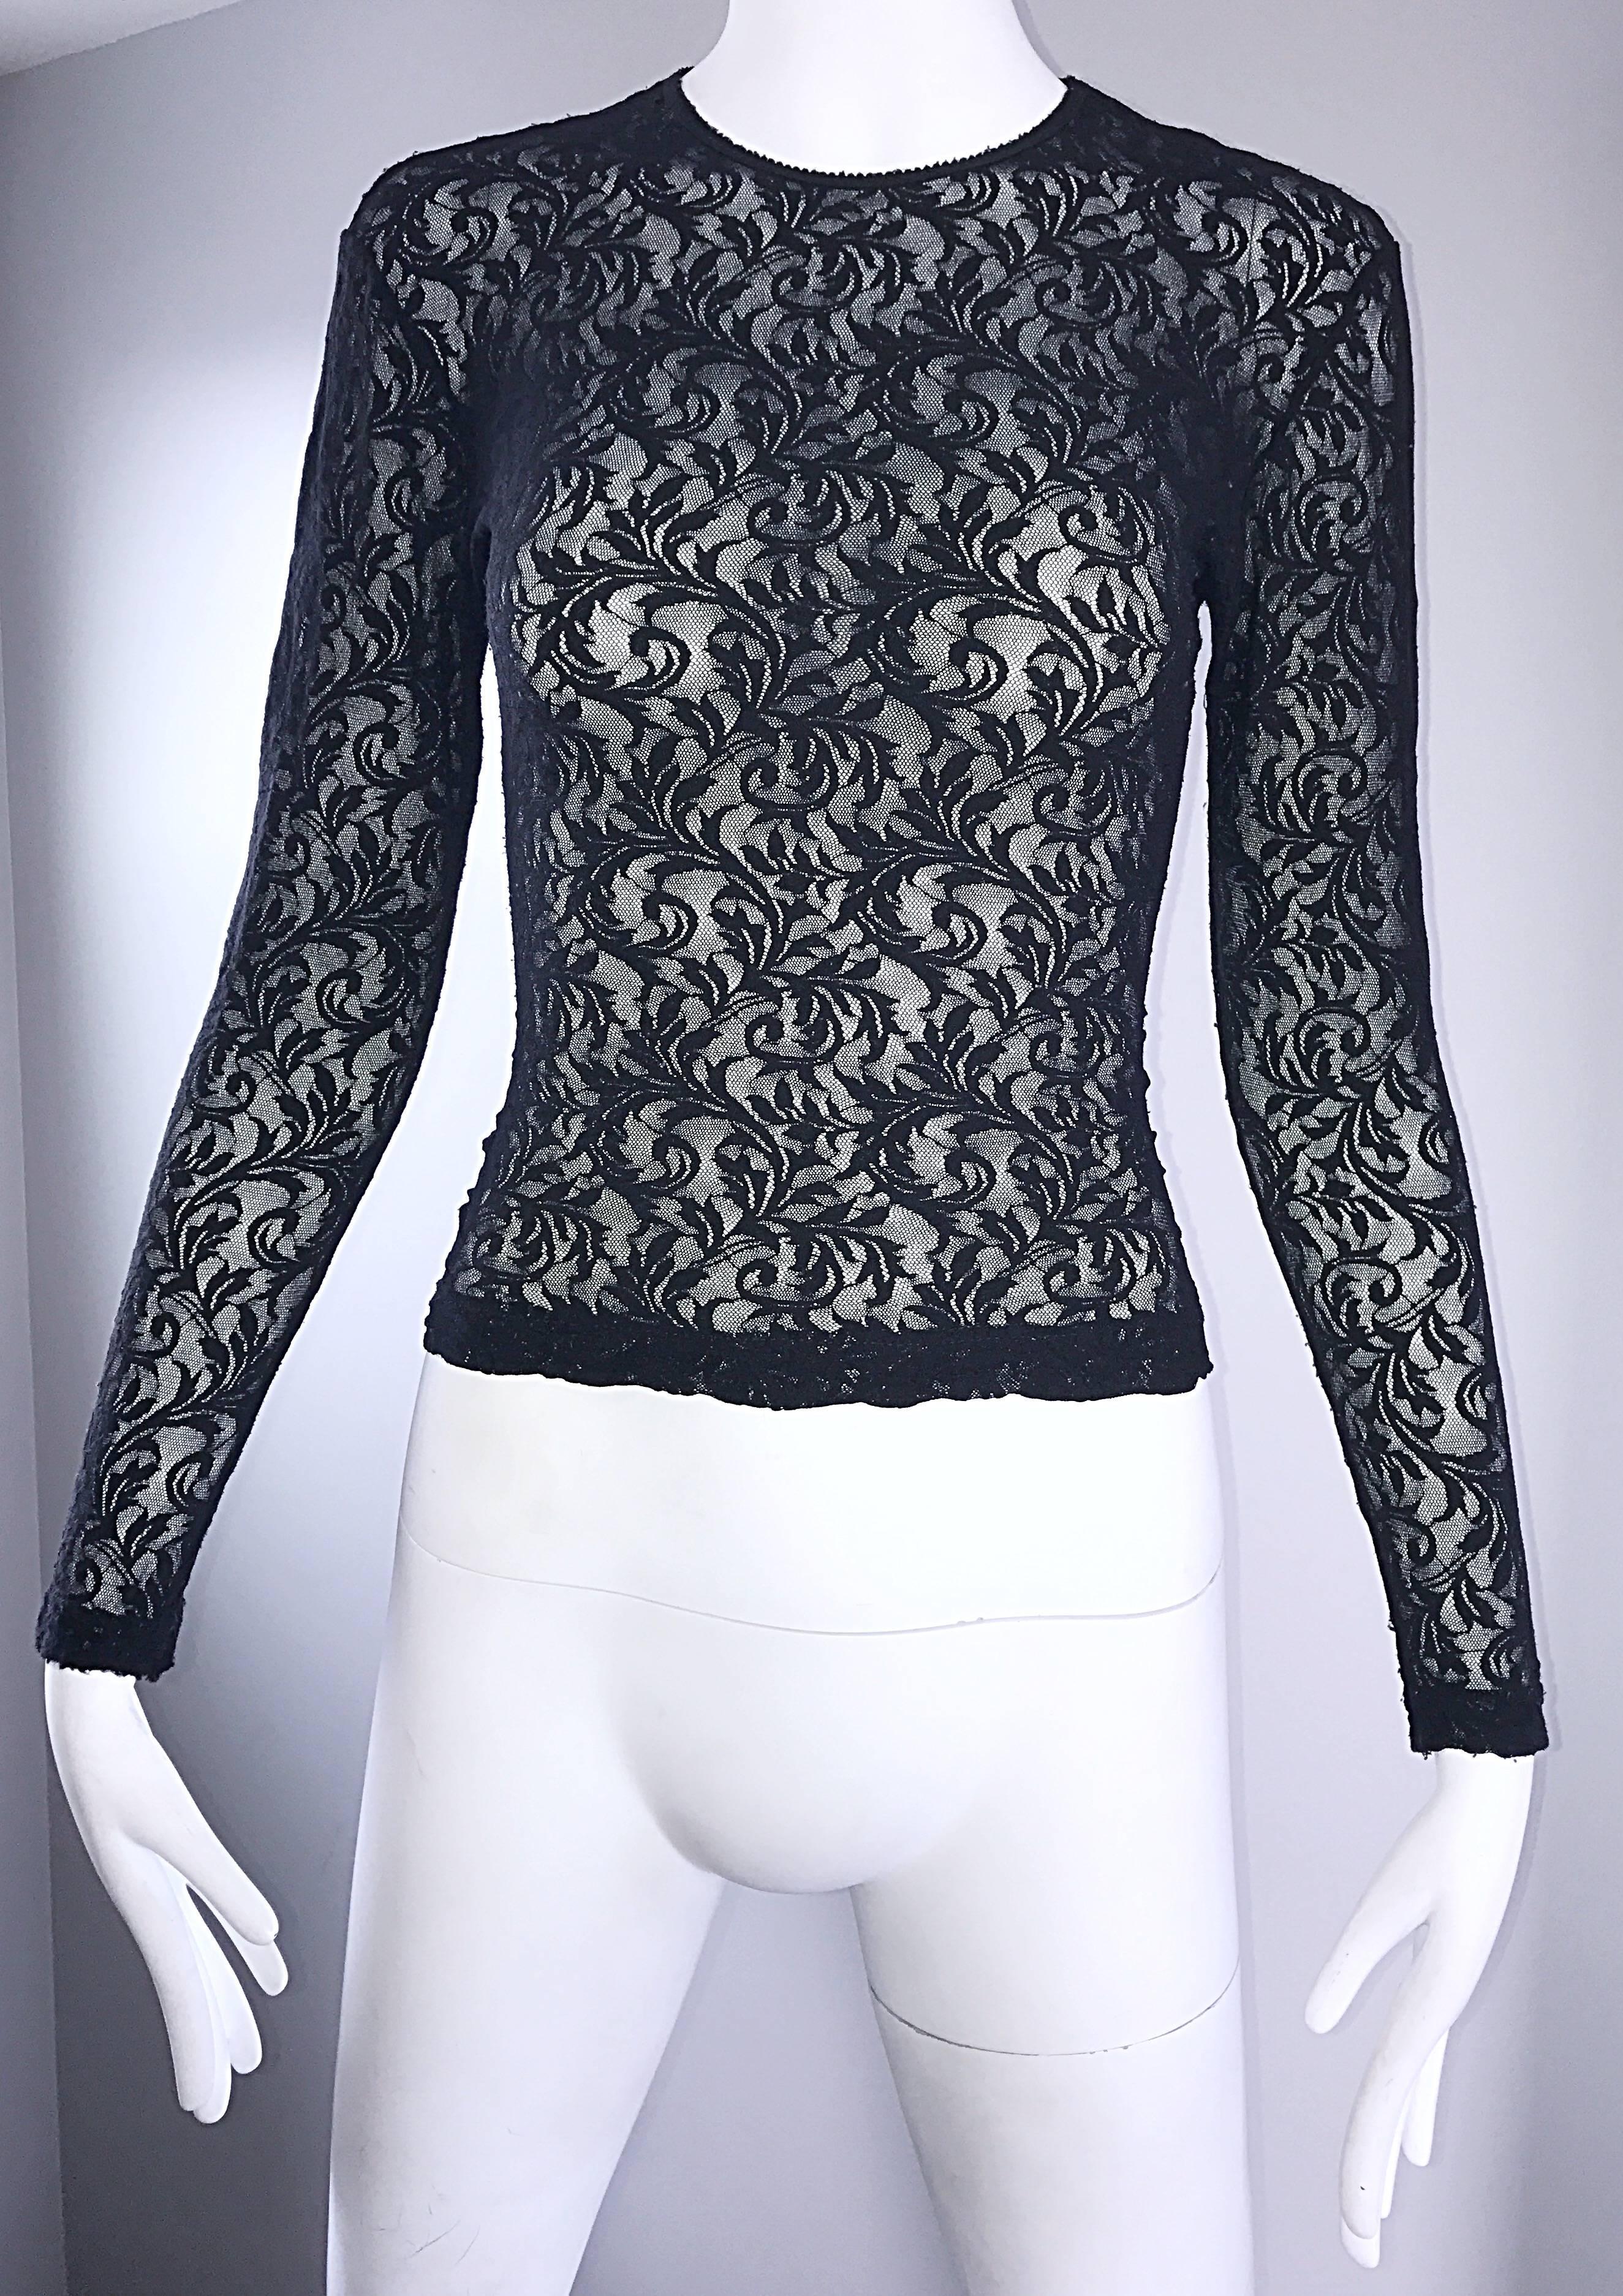 1990s Calvin Klein Black Lace Vintage Bodycon Sexy Sheer 90s Crop Top Blouse In Excellent Condition For Sale In San Diego, CA